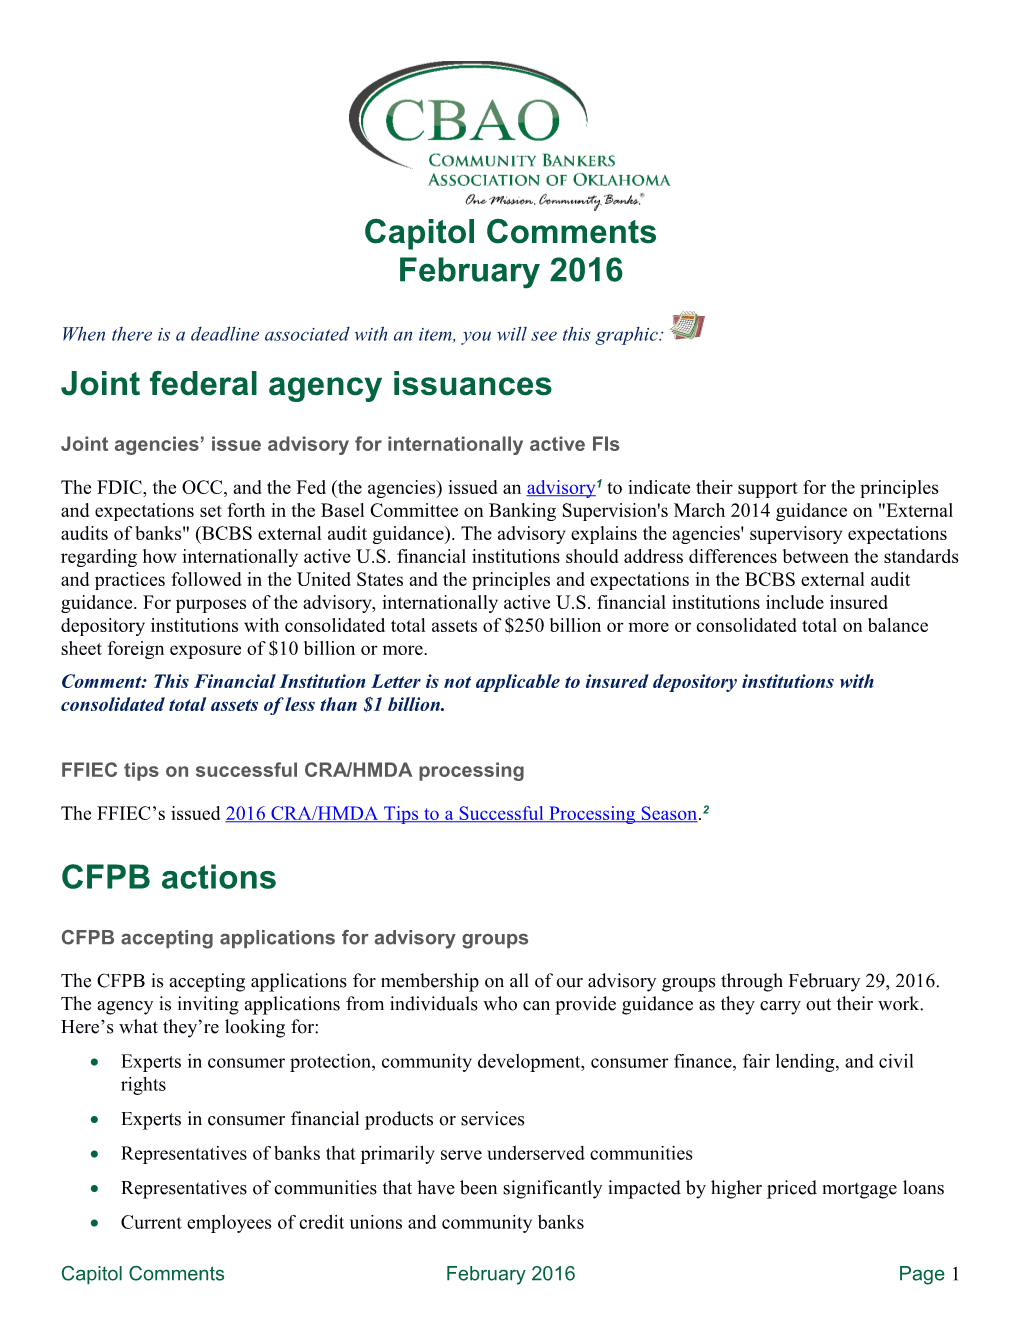 Joint Federal Agency Issuances